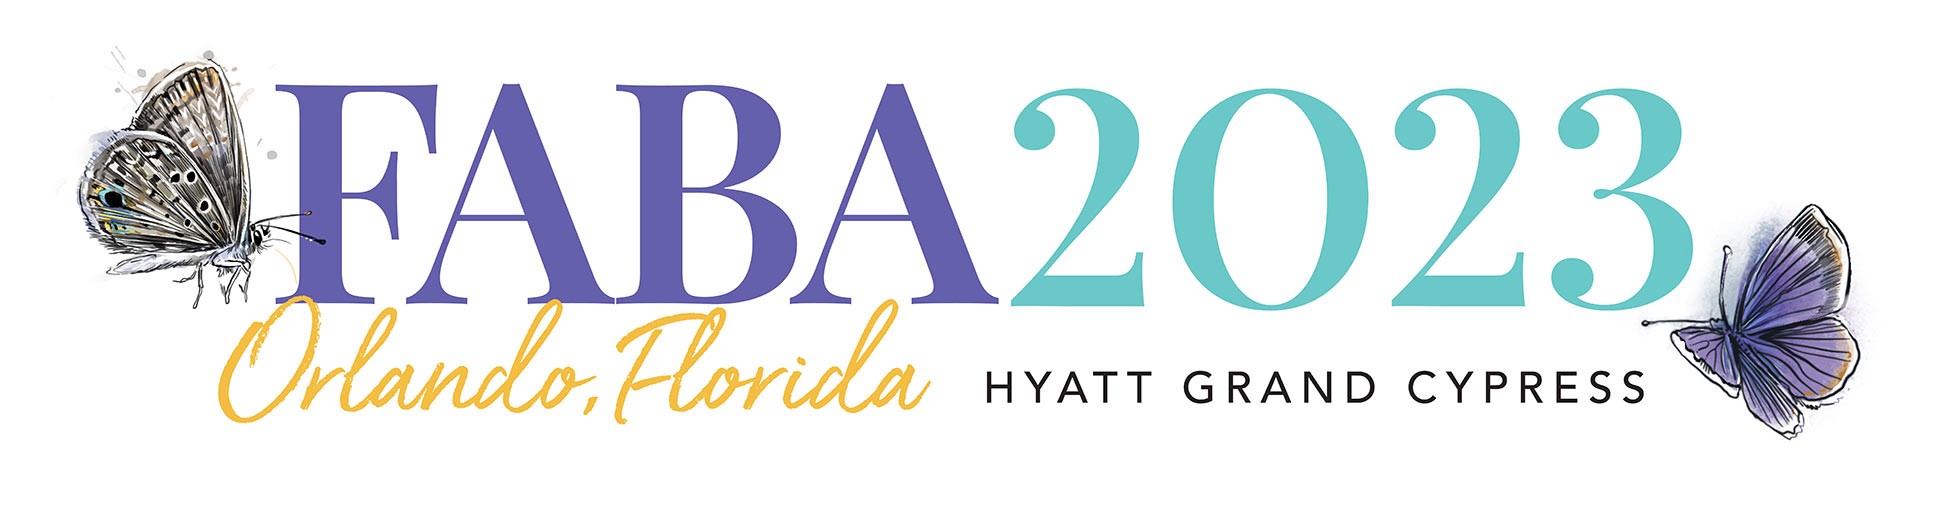 Which ABA Conference Should I Attend? ABA Technologies